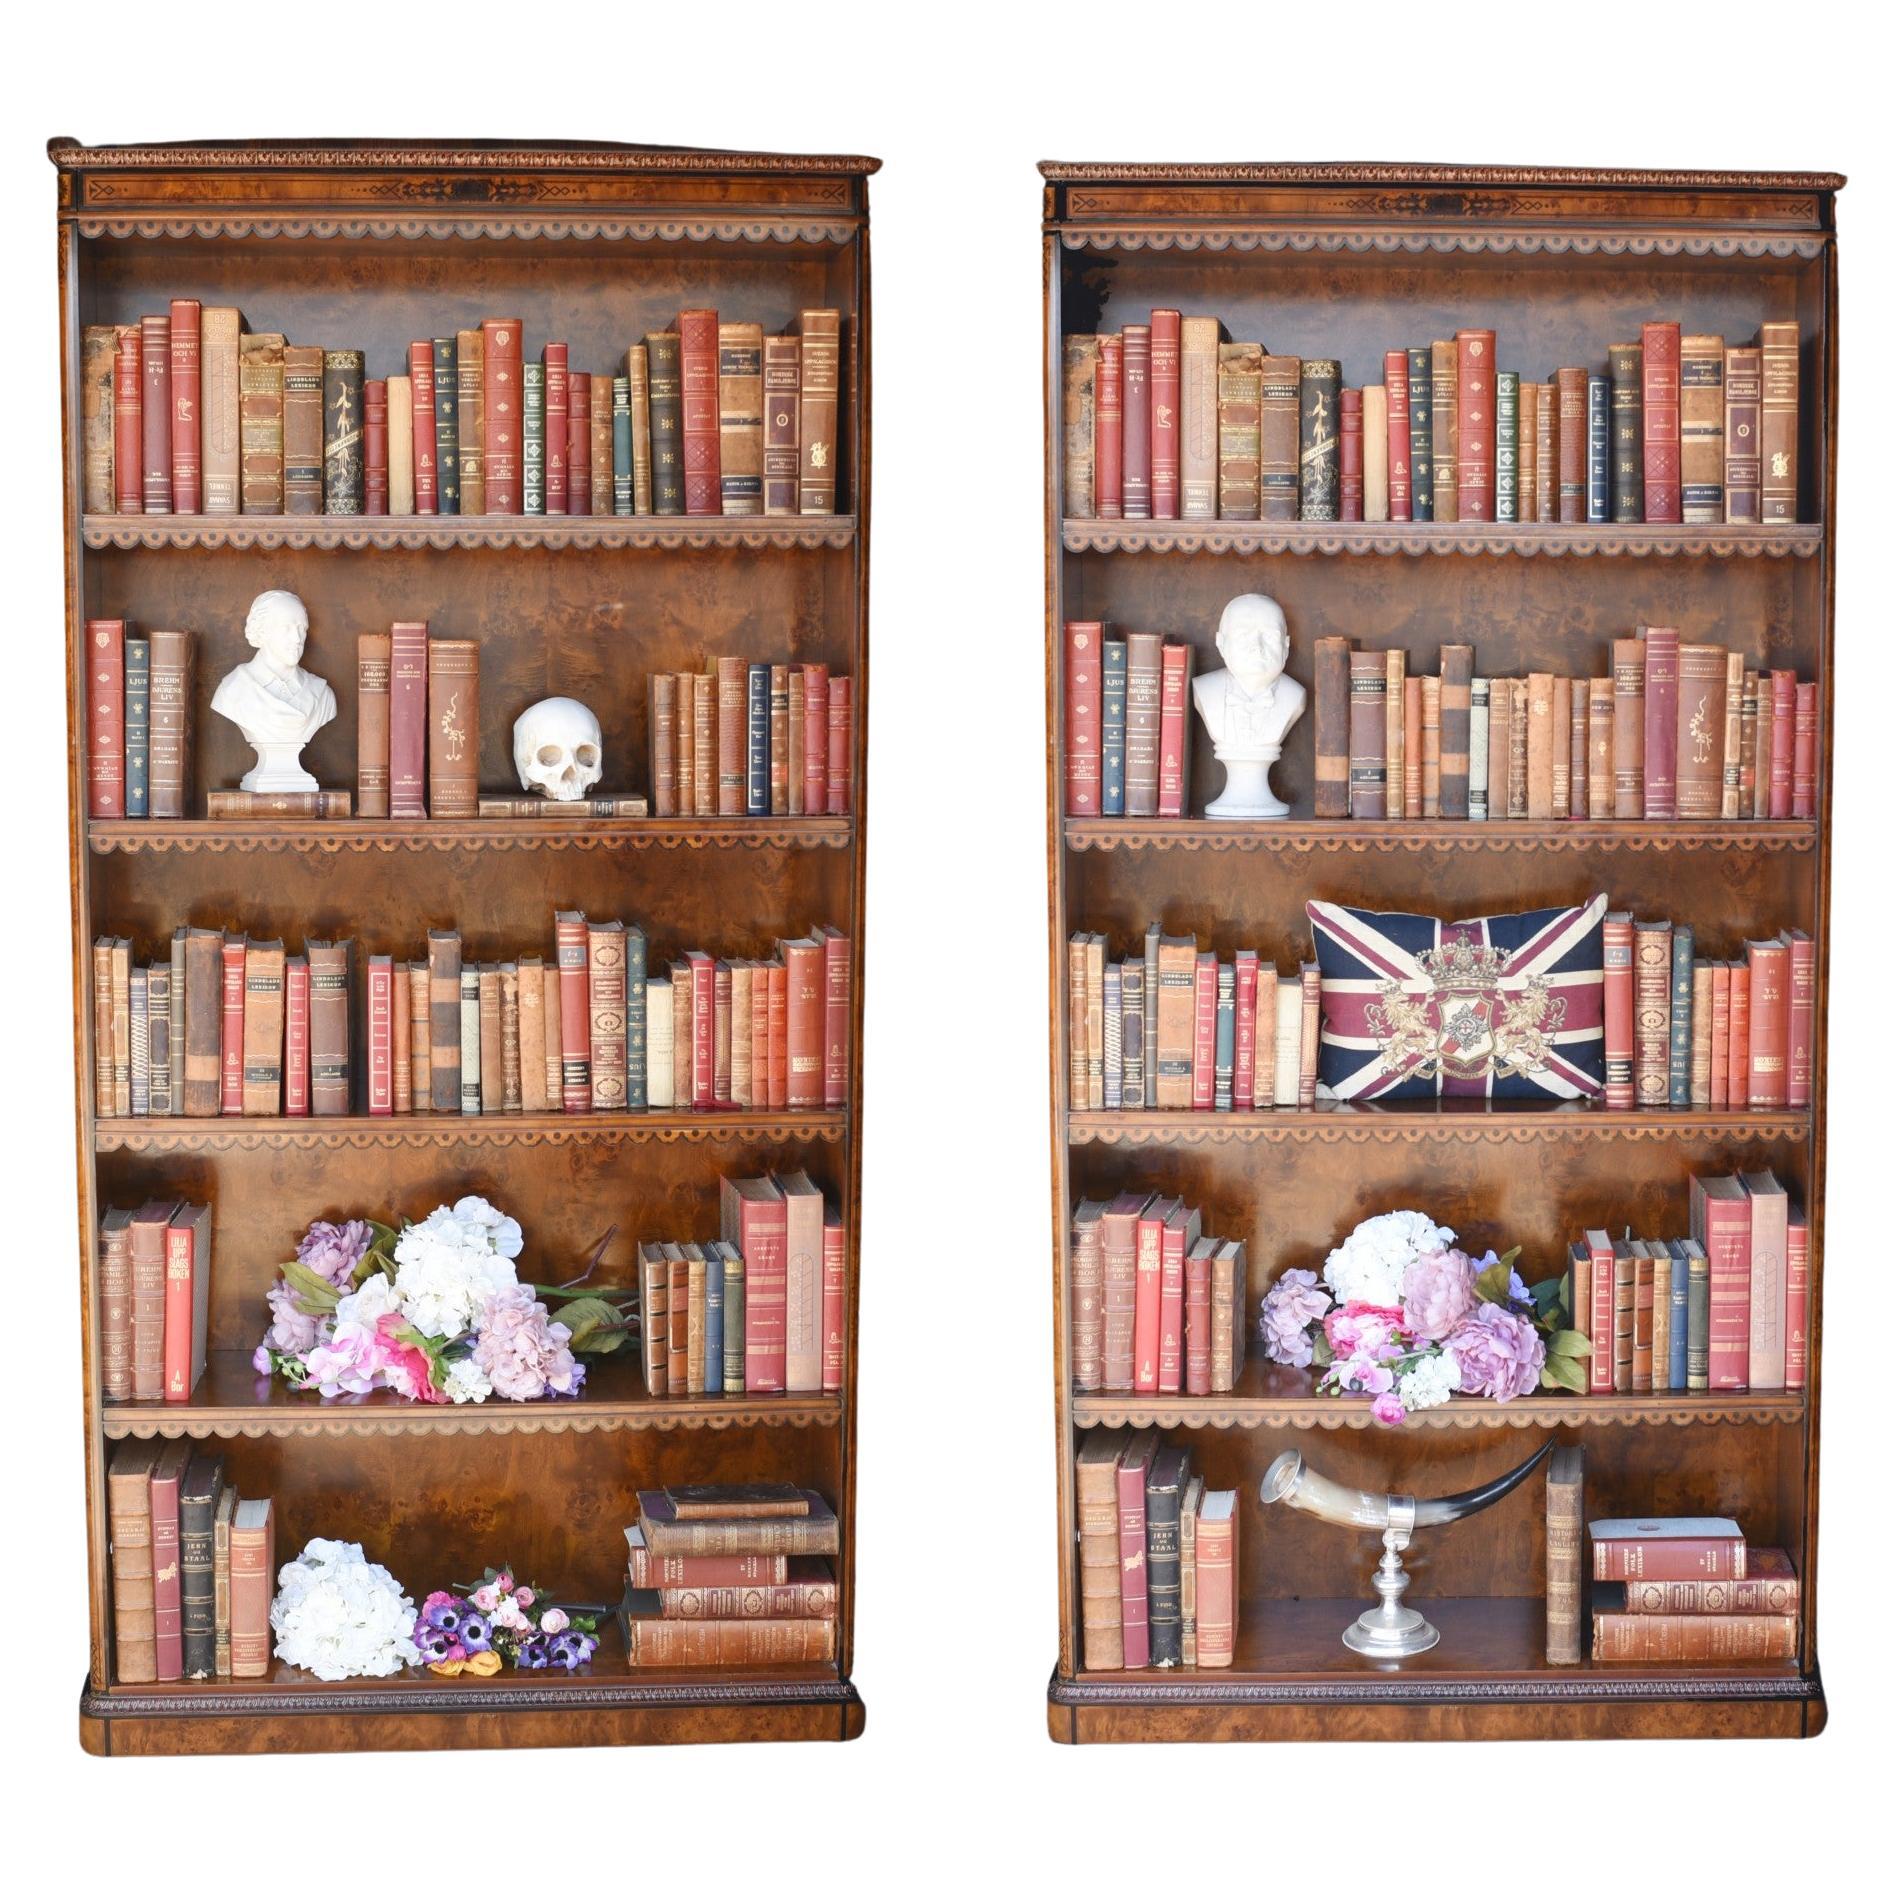 You are looking at a pair of English Sheraton style openfront bookcases hand crafted from the finest mahogany. This lovely pair are the perfect mix of decorative beauty and practical functionality to make for a vintage design classic. They look